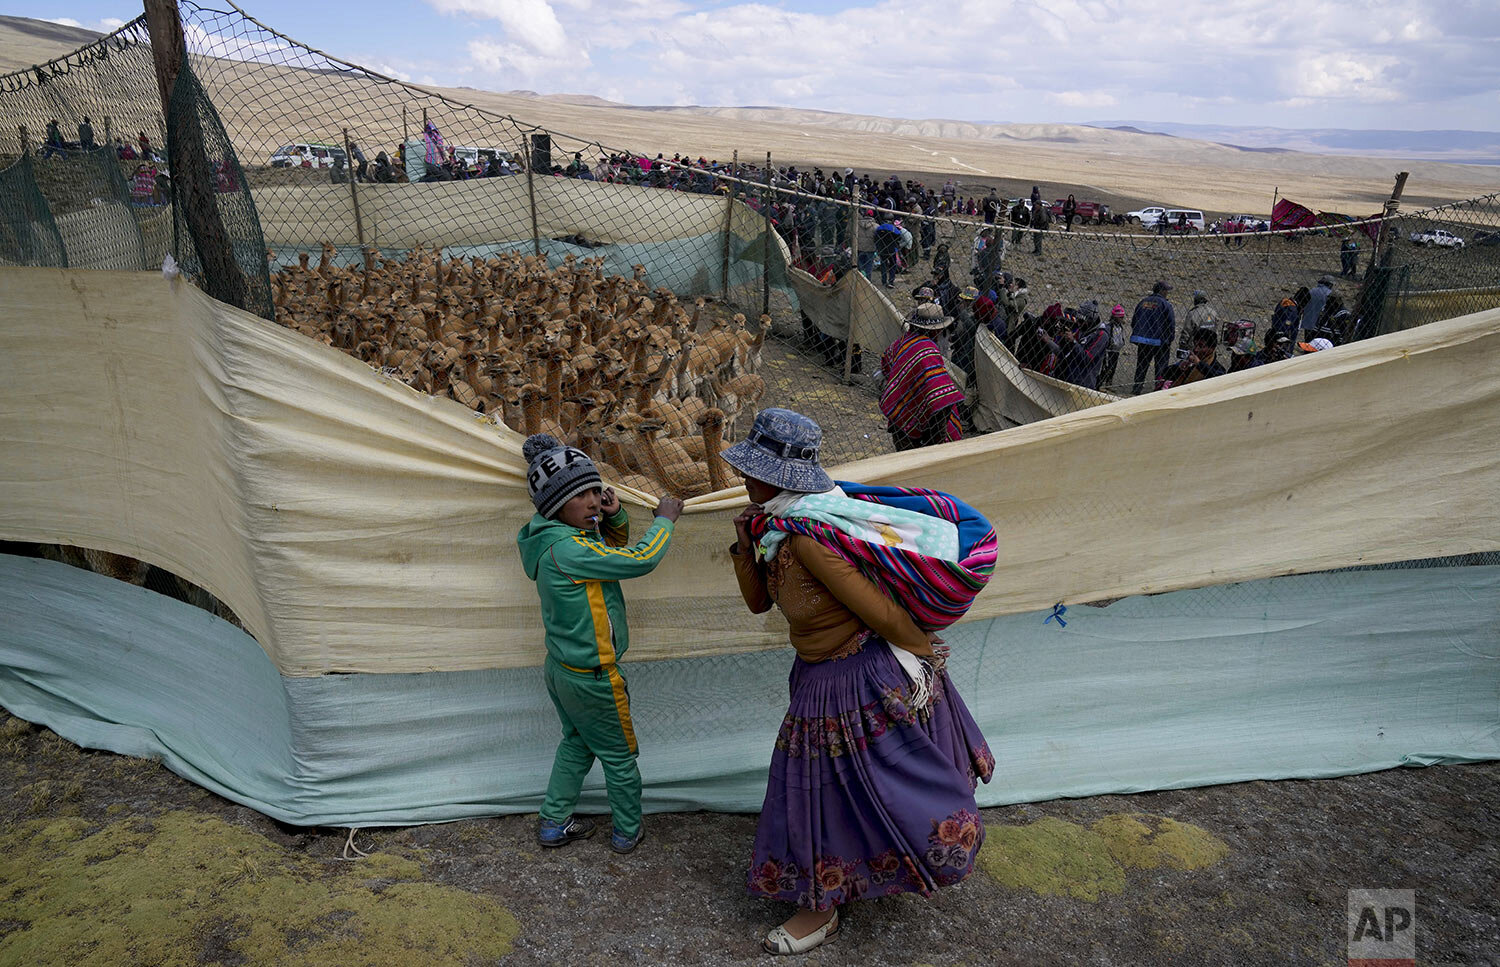  An Aymara Indigenous woman and her son watch wild vicuña herded into a temporary corral to shear their wool inside the Apolobamba protected area near Puyo Puyo village in Bolivia,, Sept. 26, 2021. Once over-hunted and on the brink of extinction, vic